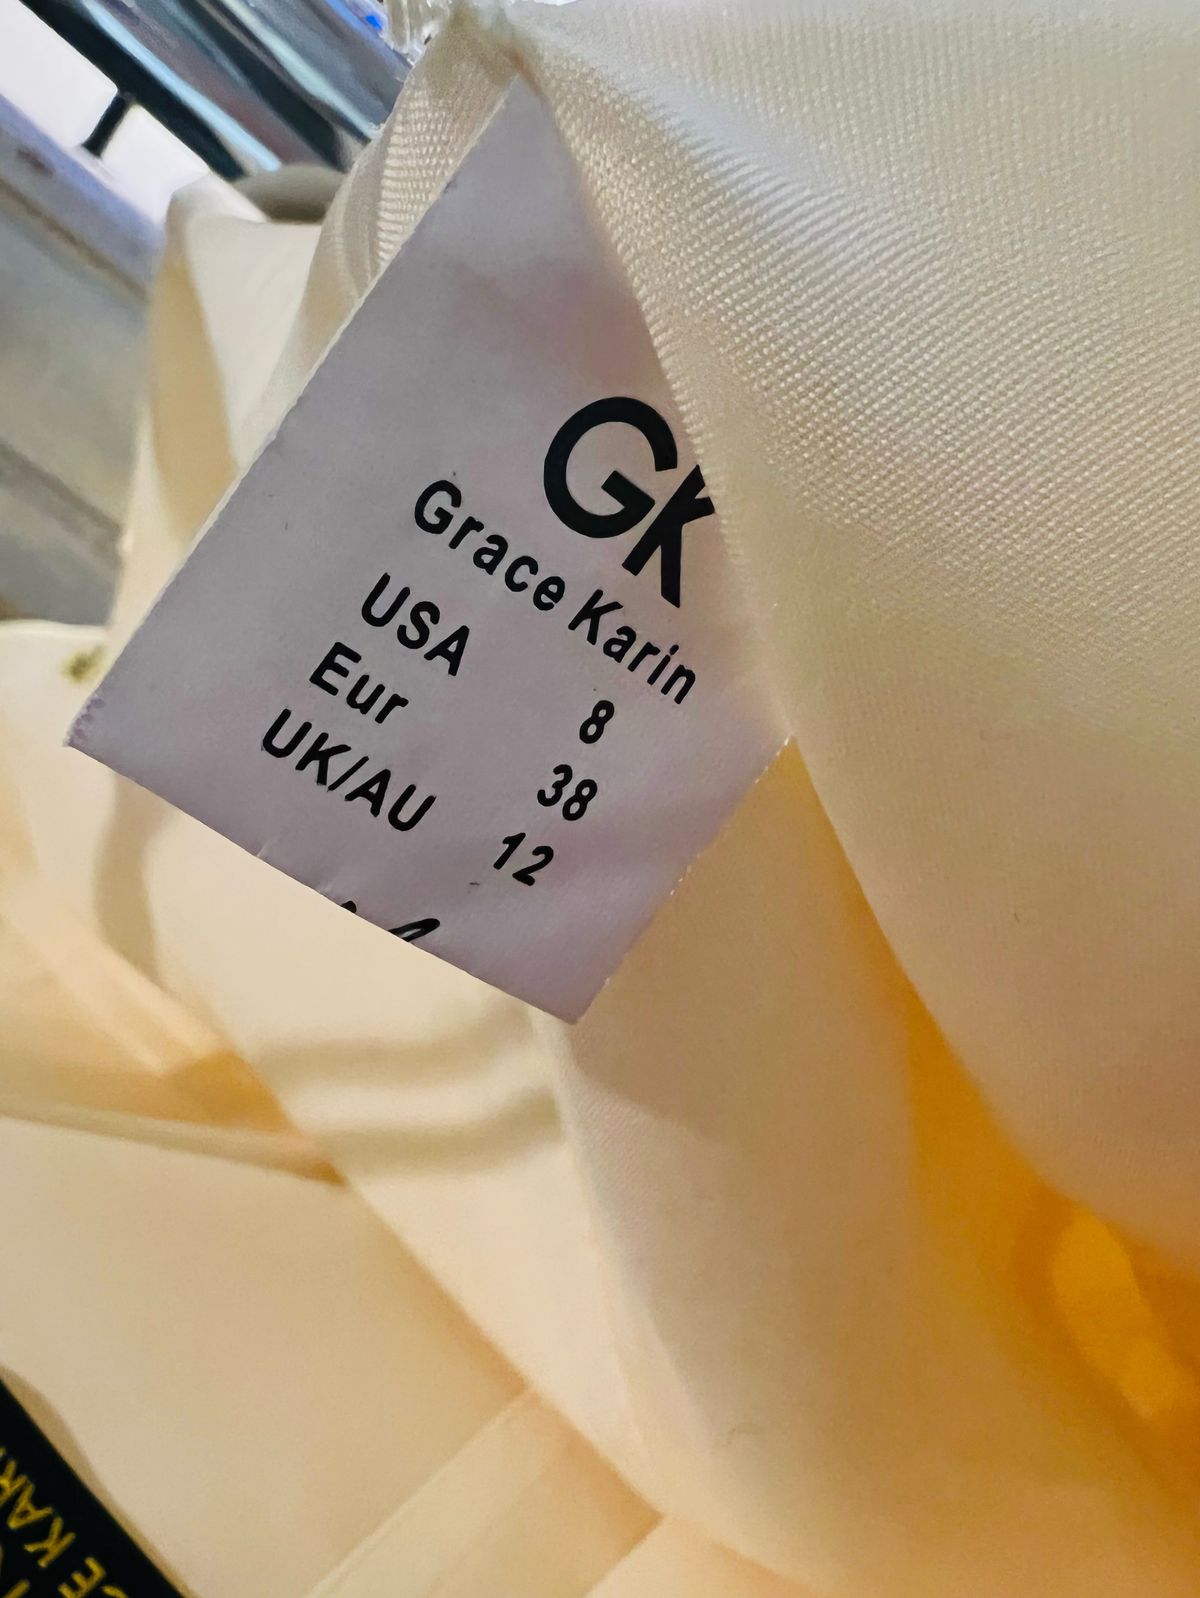 Grace karin Size 8 Prom Yellow Ball Gown on Queenly